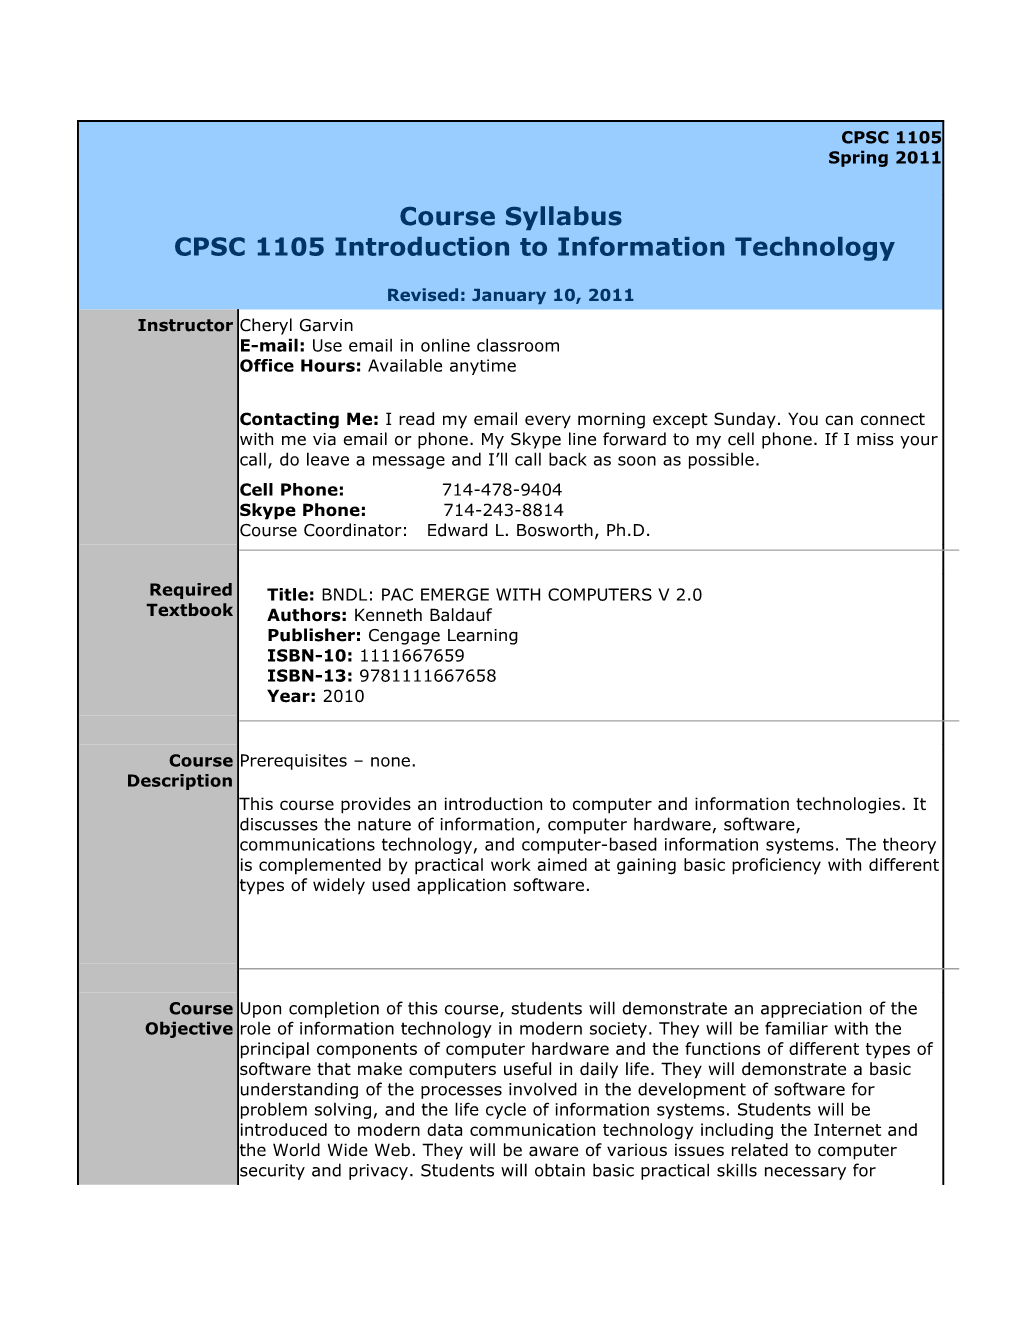 Course Syllabuscpsc 1105 Introduction to Information Technology